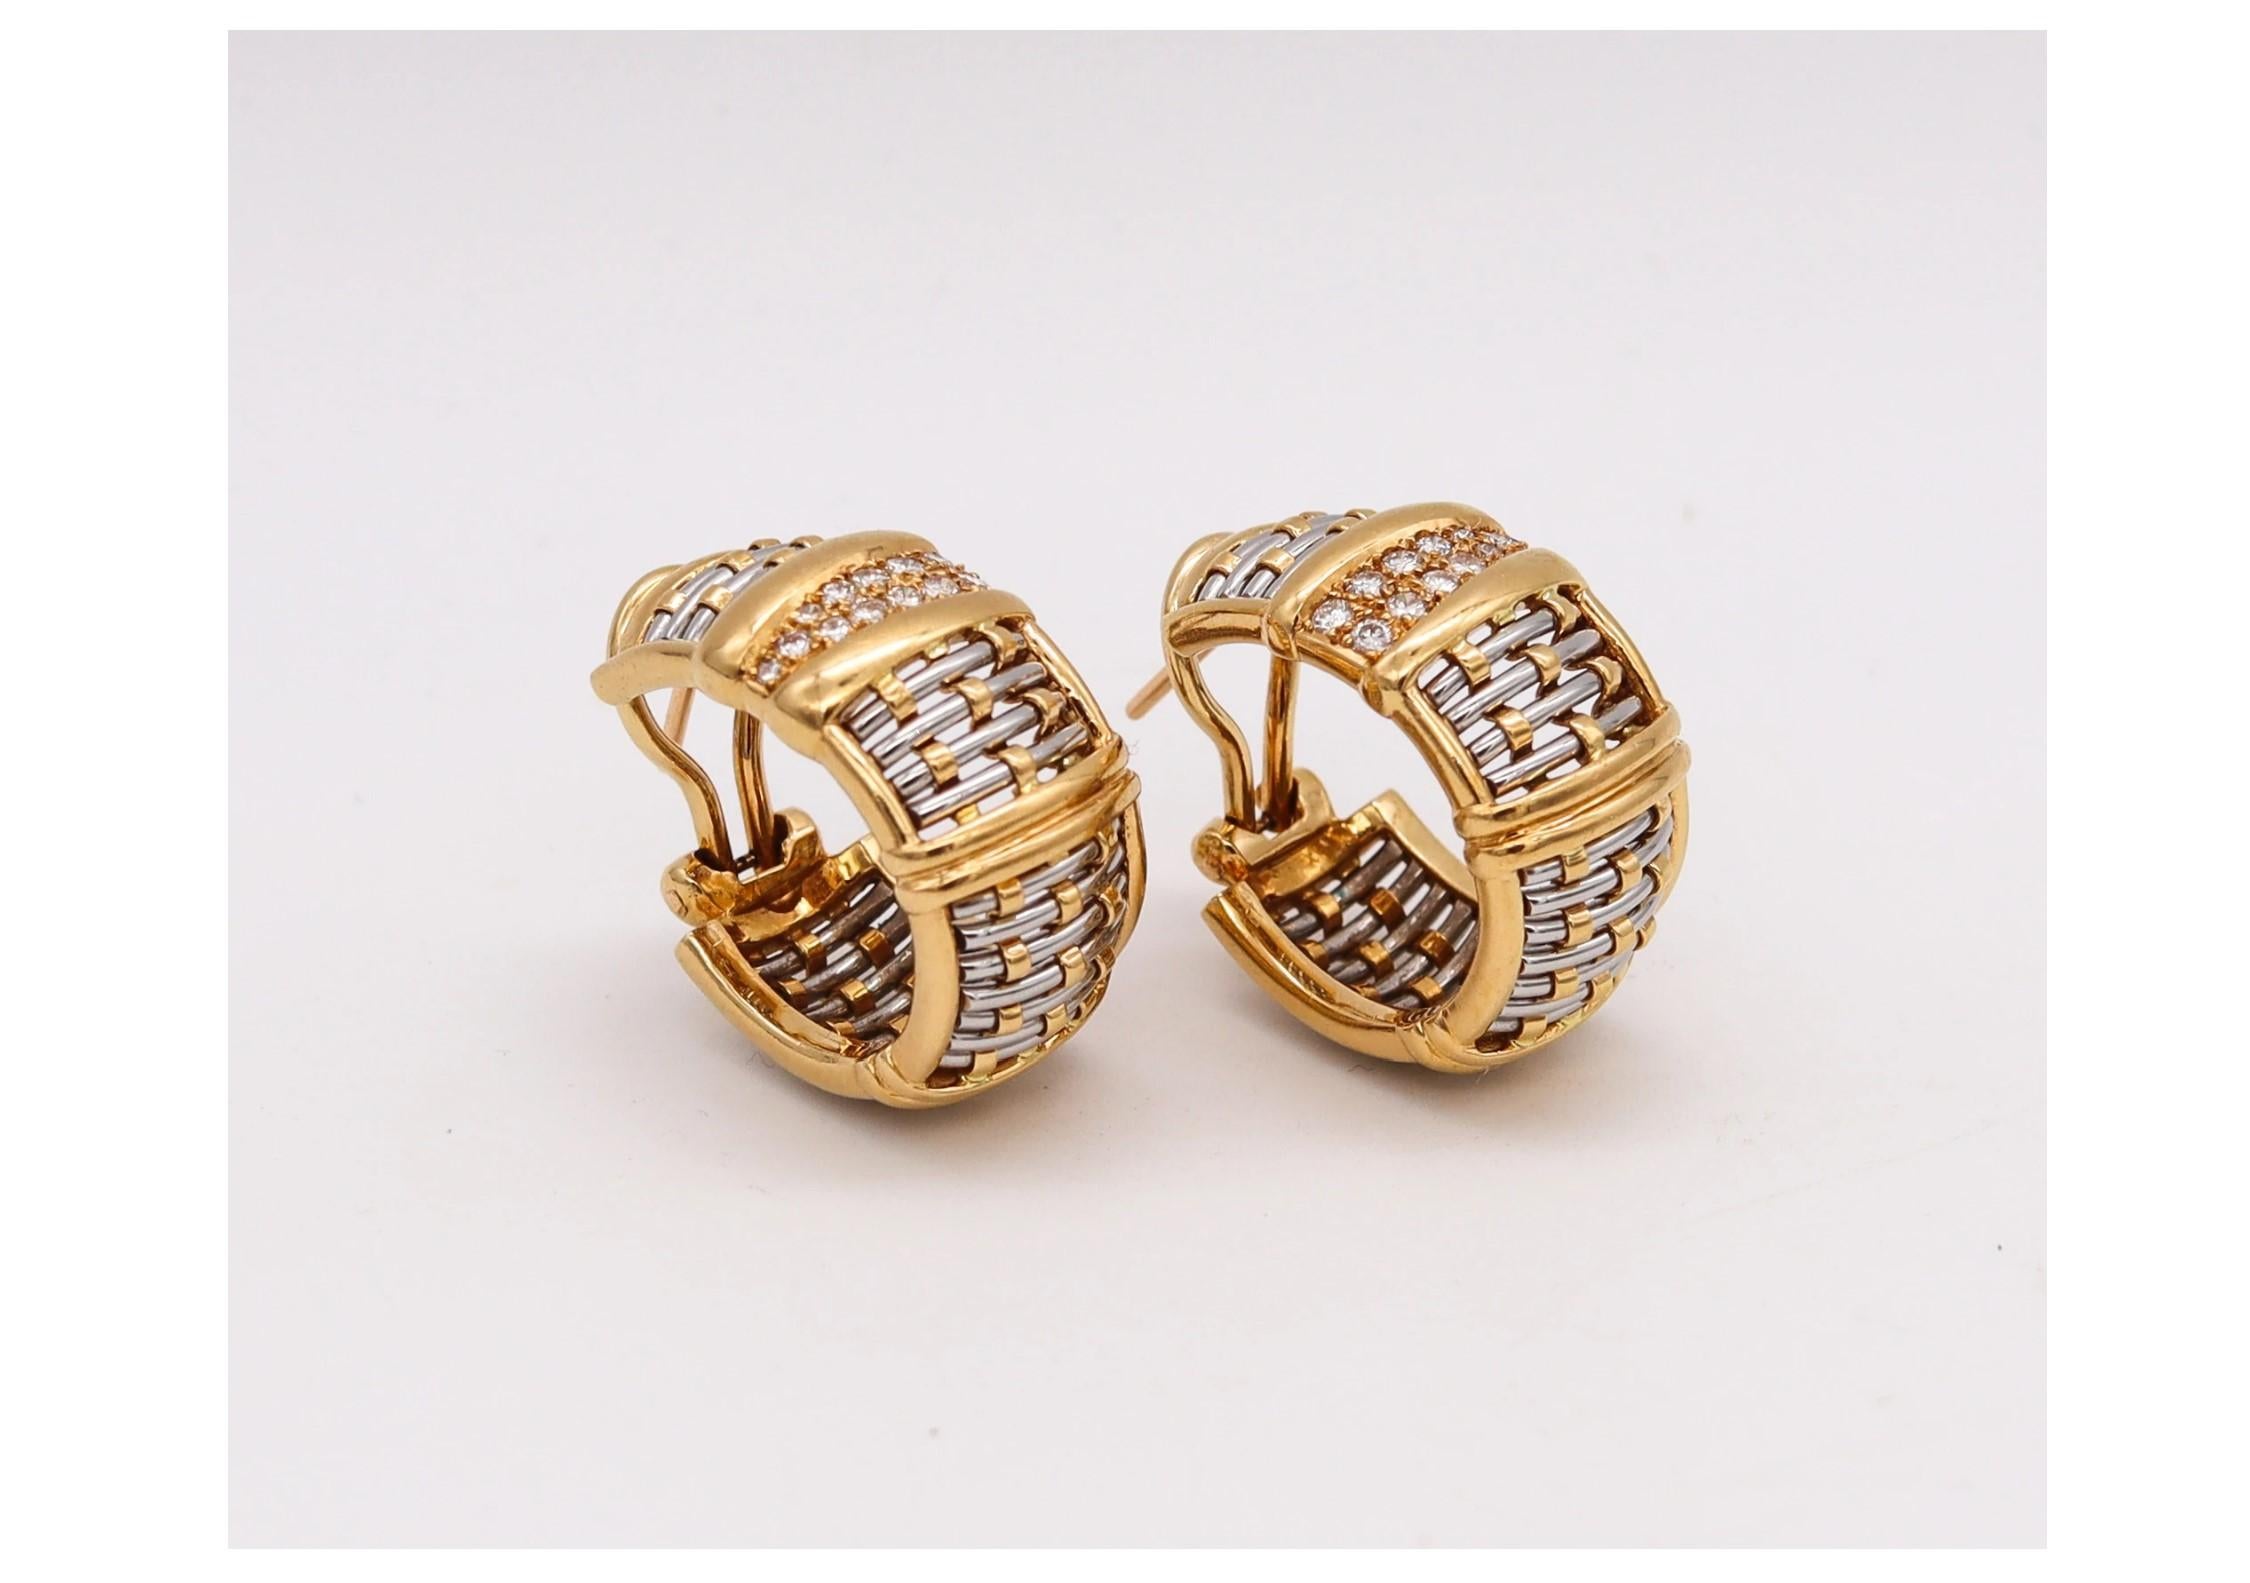 Pair of hoops earrings designed by Cartier.

Beautiful modern pair of hoop earrings, created with a caged linear patterns by the jewelry house of Cartier. These very rare pieces has been crafted in solid yellow gold of 18 karats and finished, with